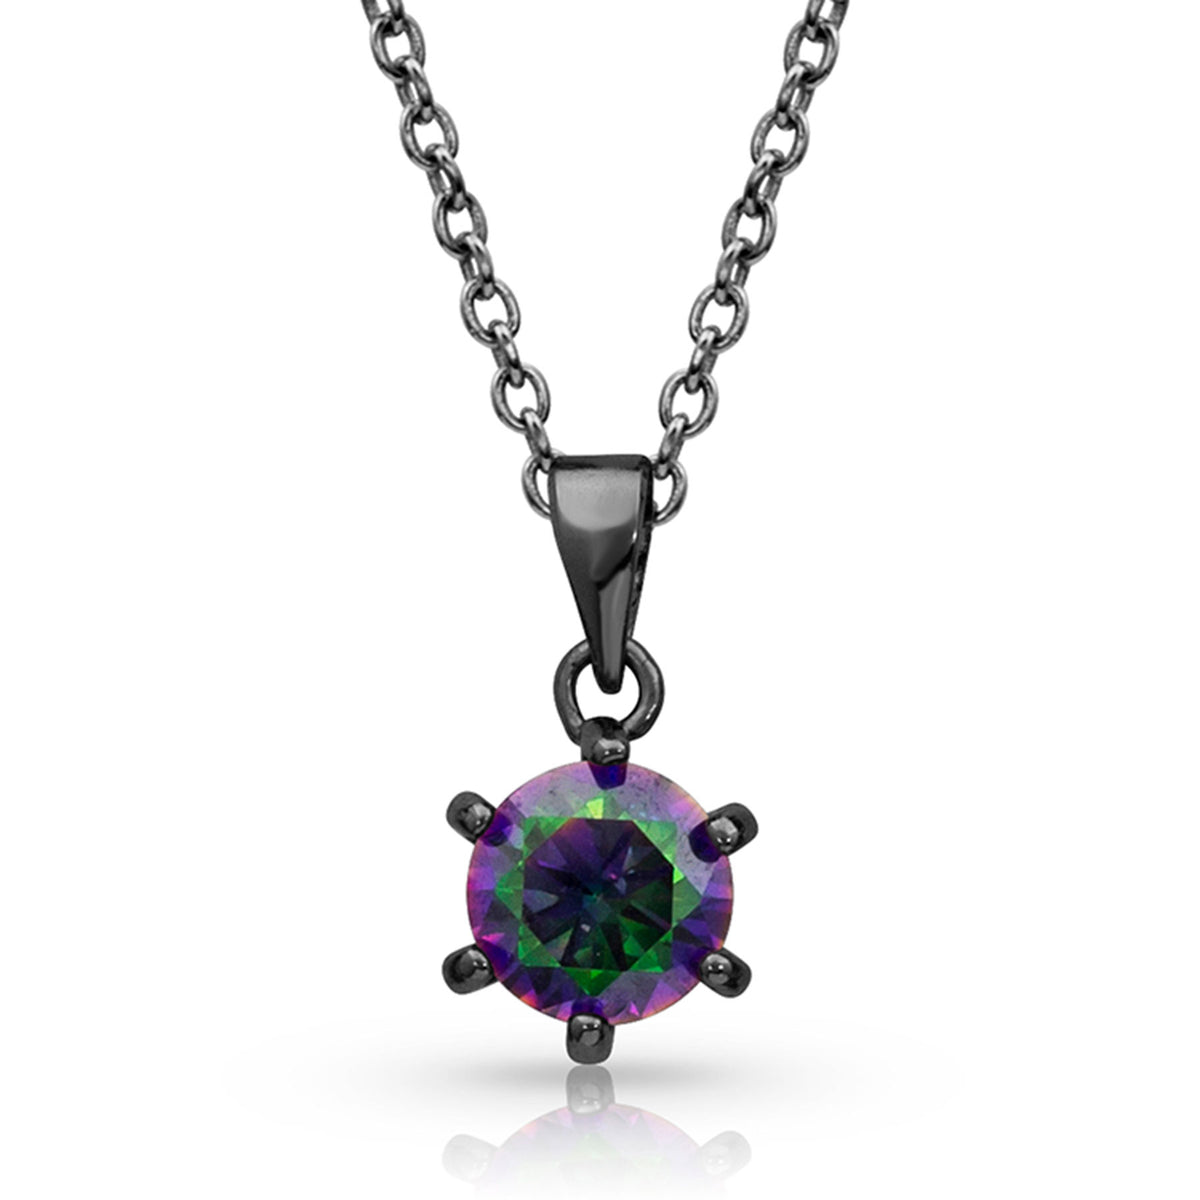 Montana Necklace - Northern Lights Solitaire Mystic Topaz